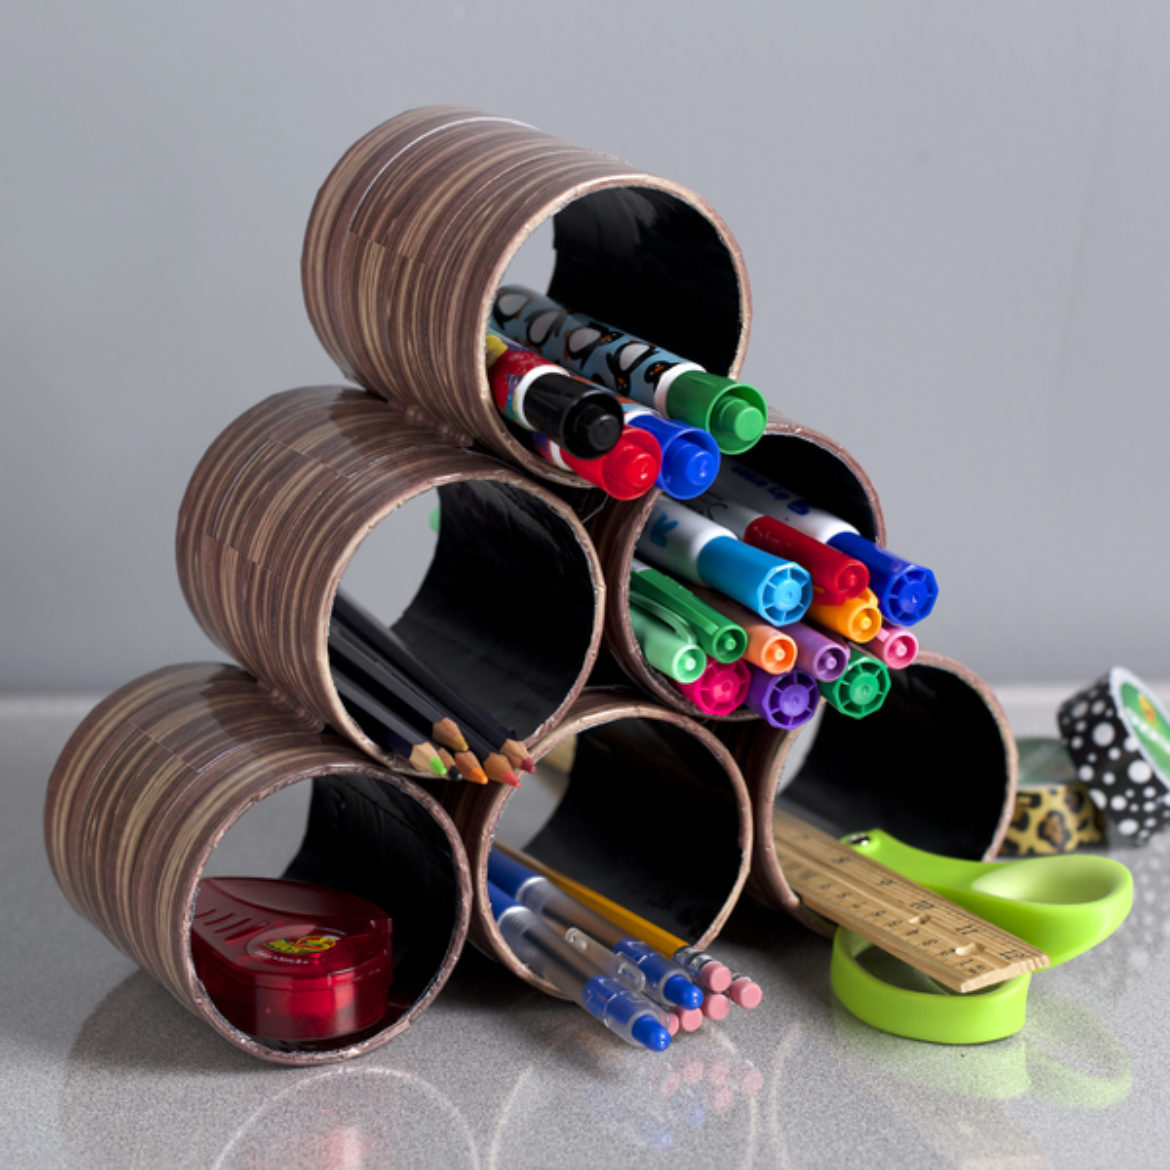 Completed Duck Tape® Desk Organizer full of pens